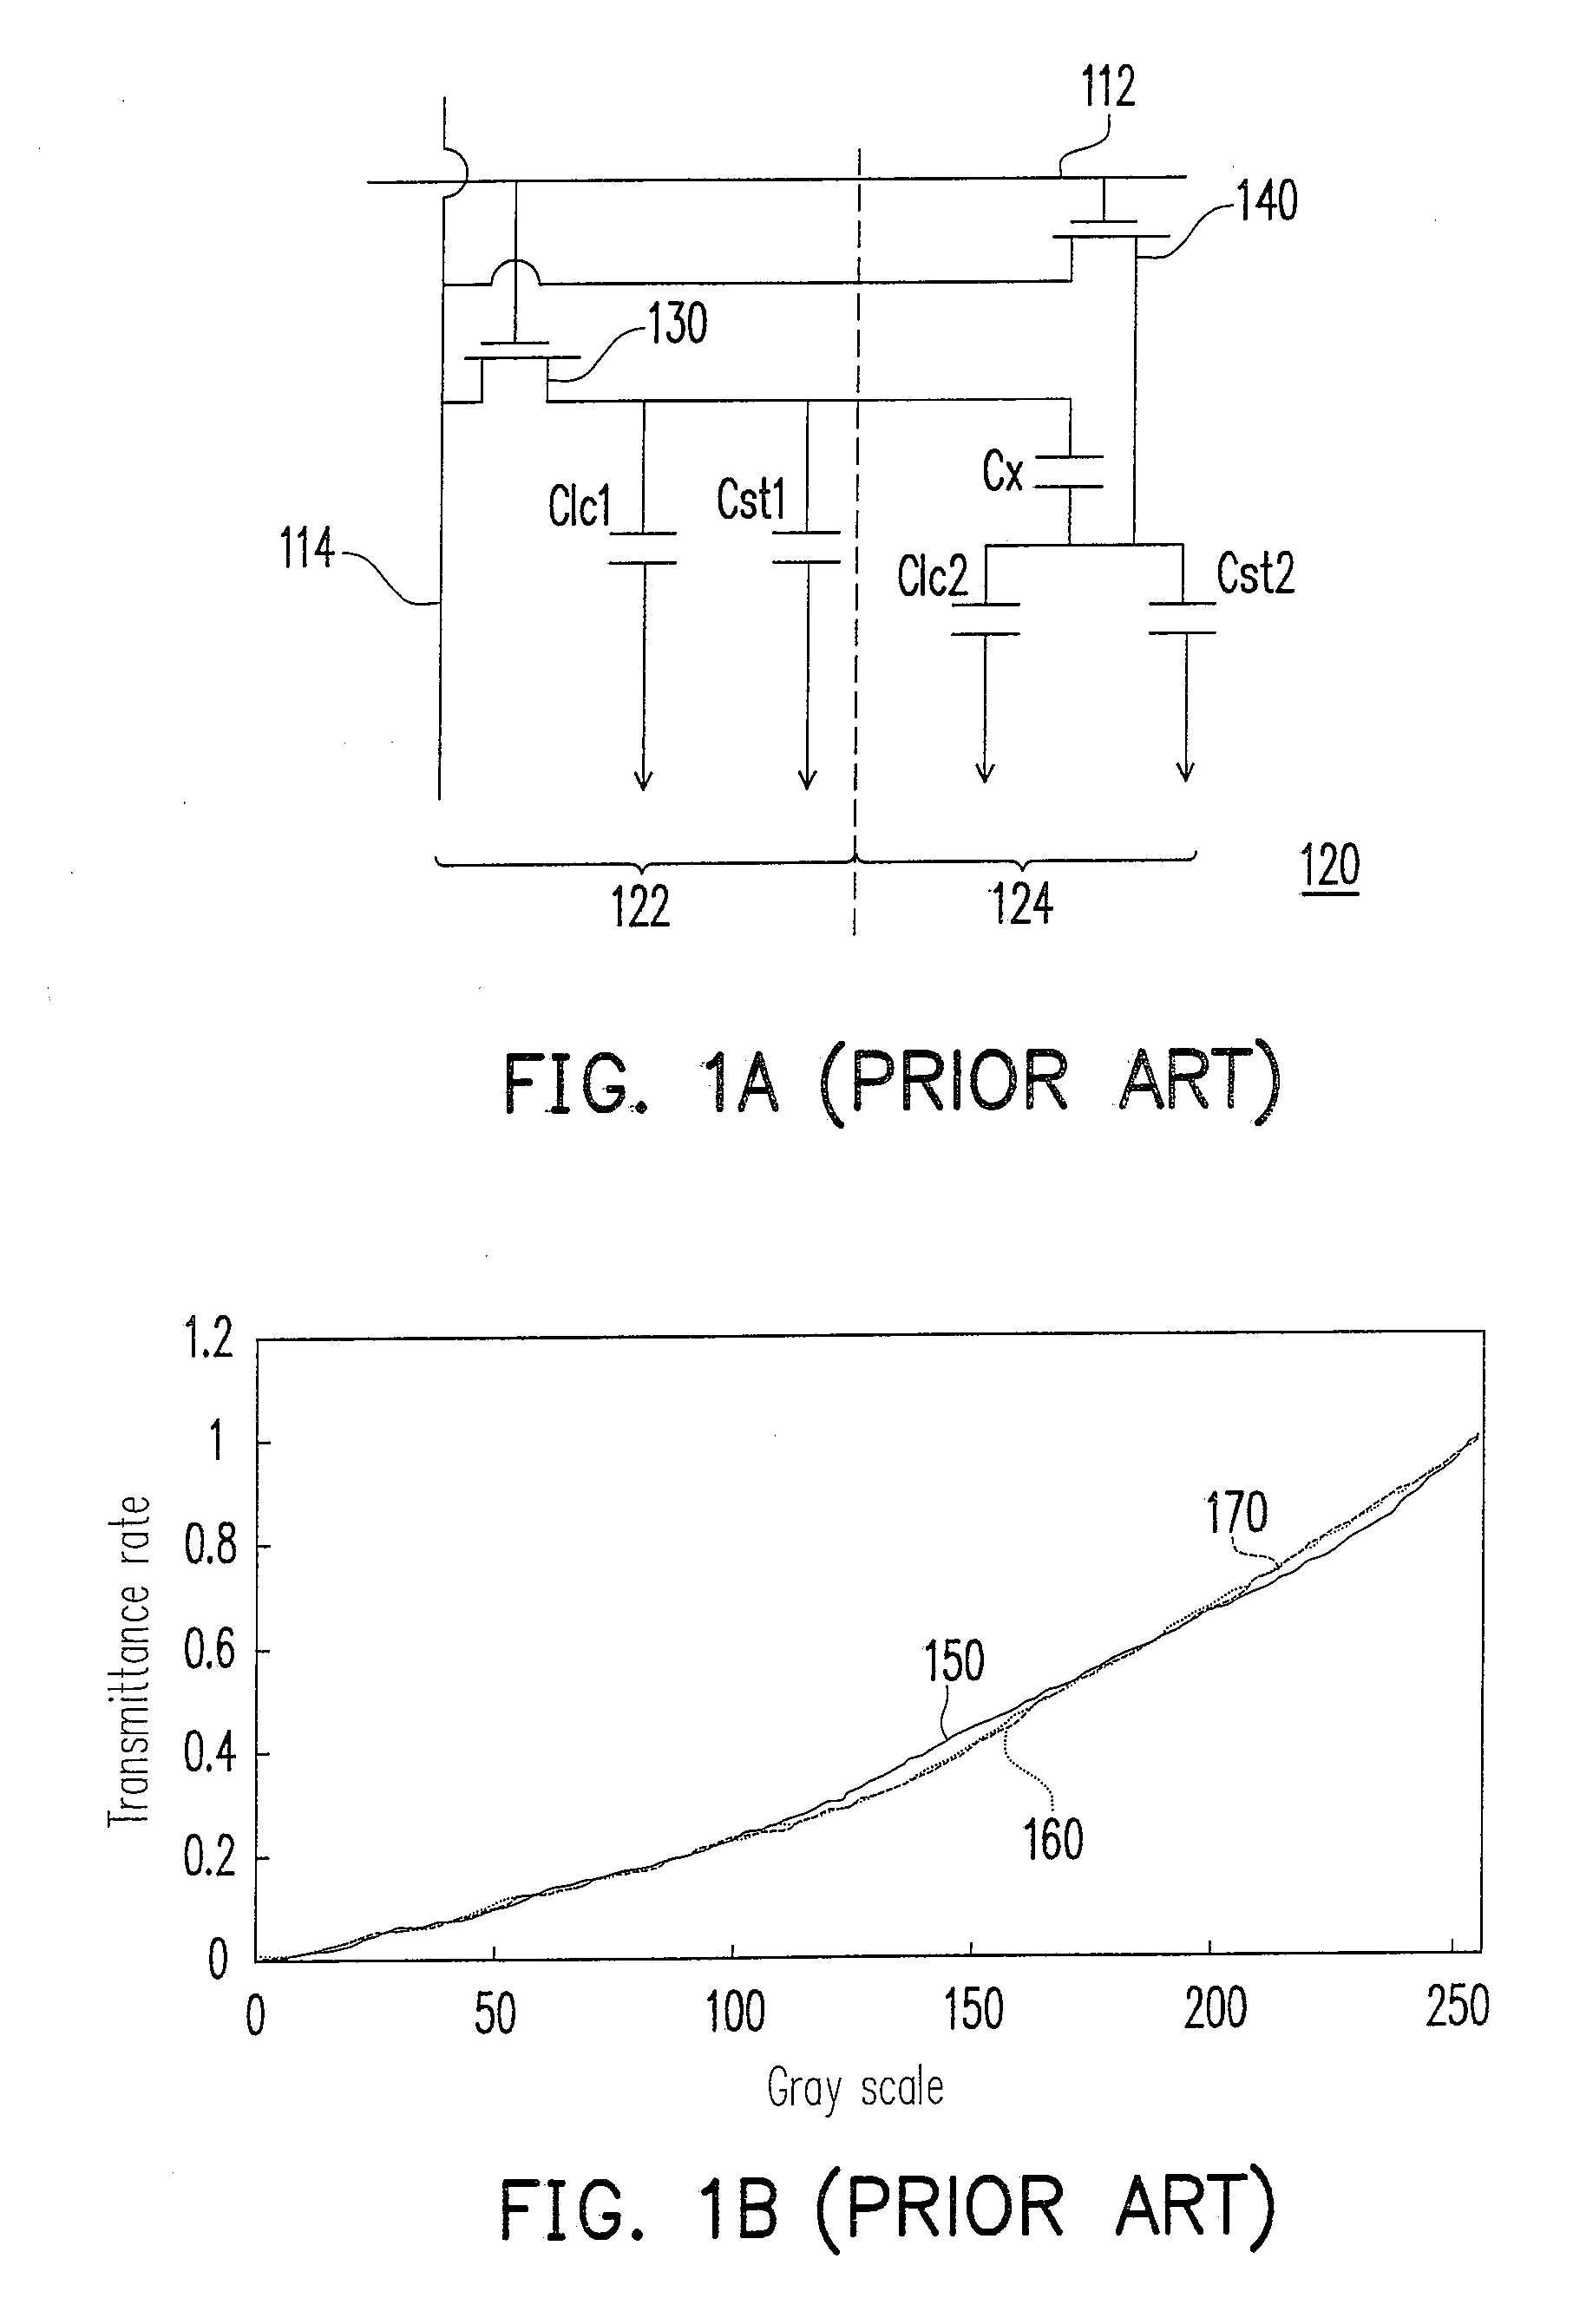 Thin film transistor array substrate and pixel structure with TFT having varying included angle of channel layer